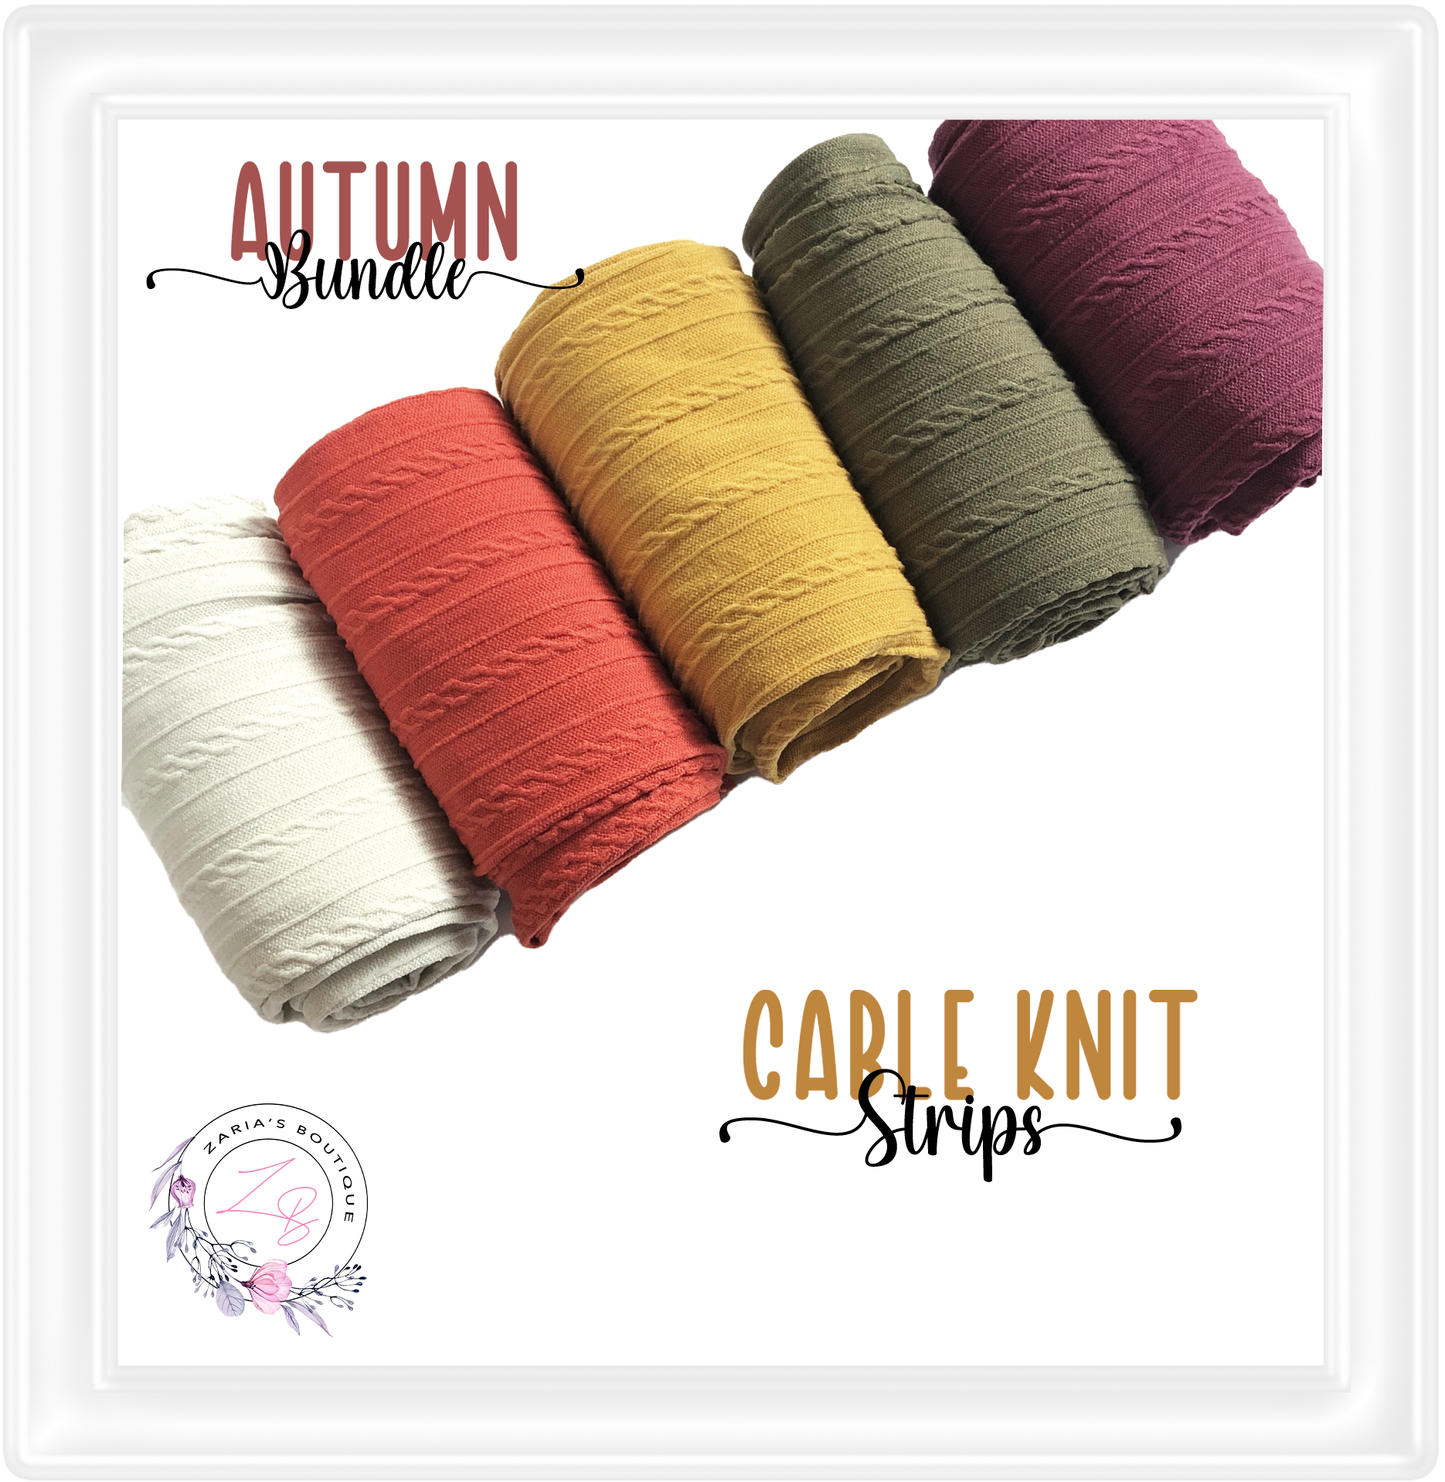 ⋅ DIY Cable Knit Strips ⋅ 25 Colours!